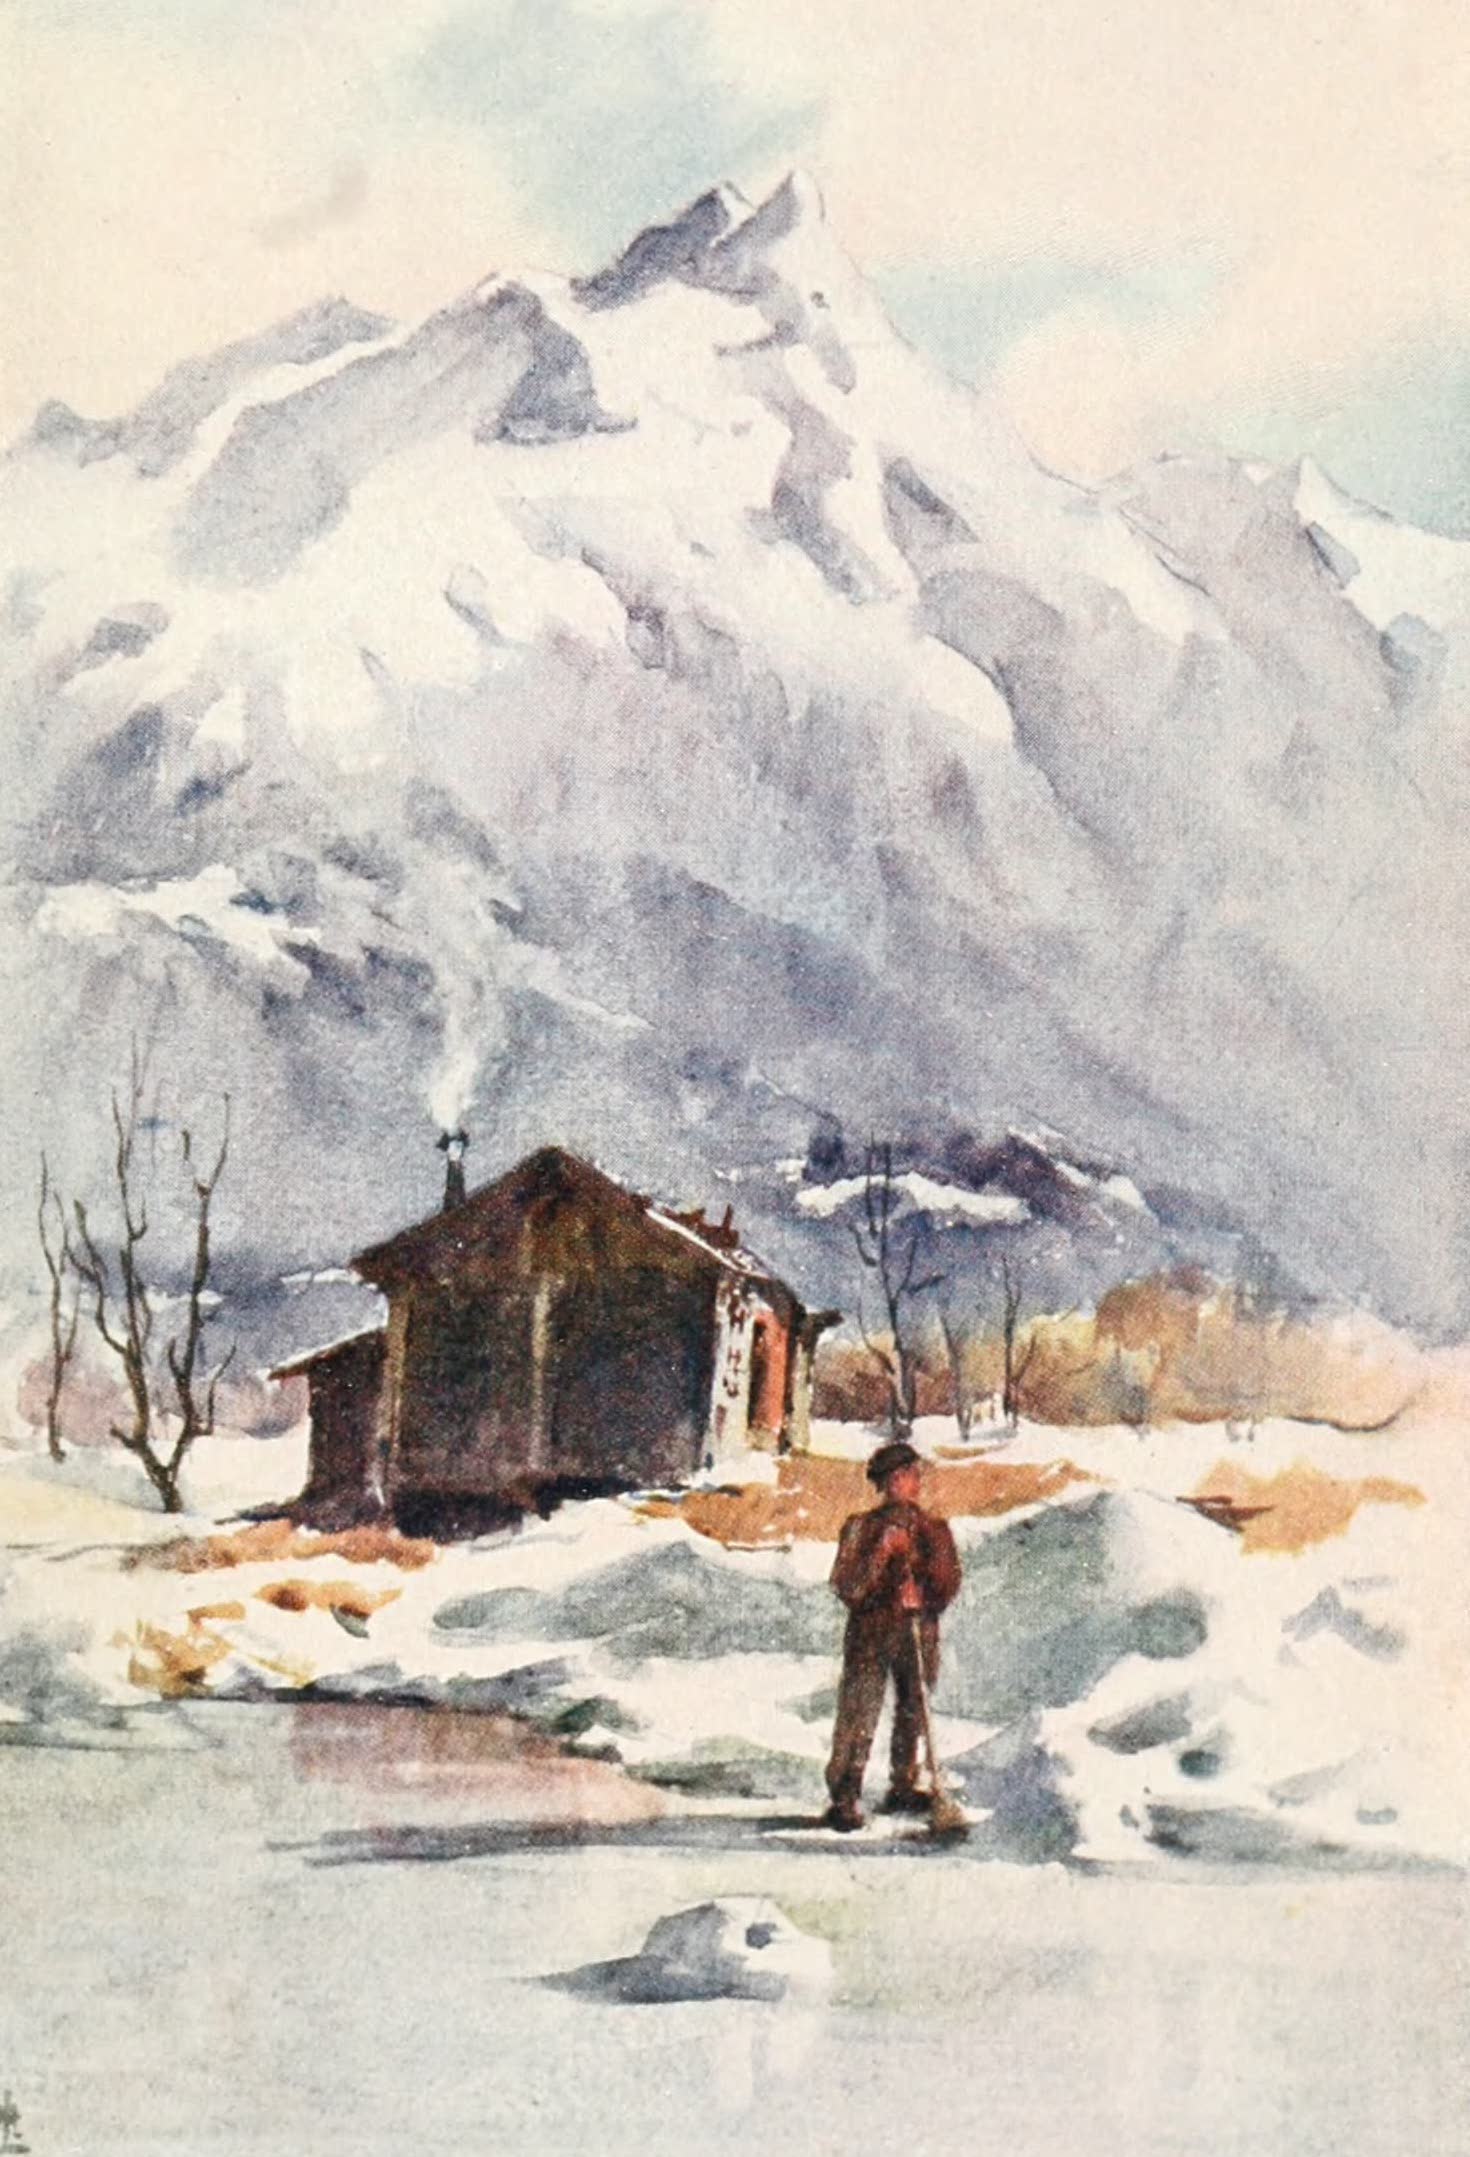 Montreux, Painted and Described - A Corner of Aigle Skating Rink (1908)